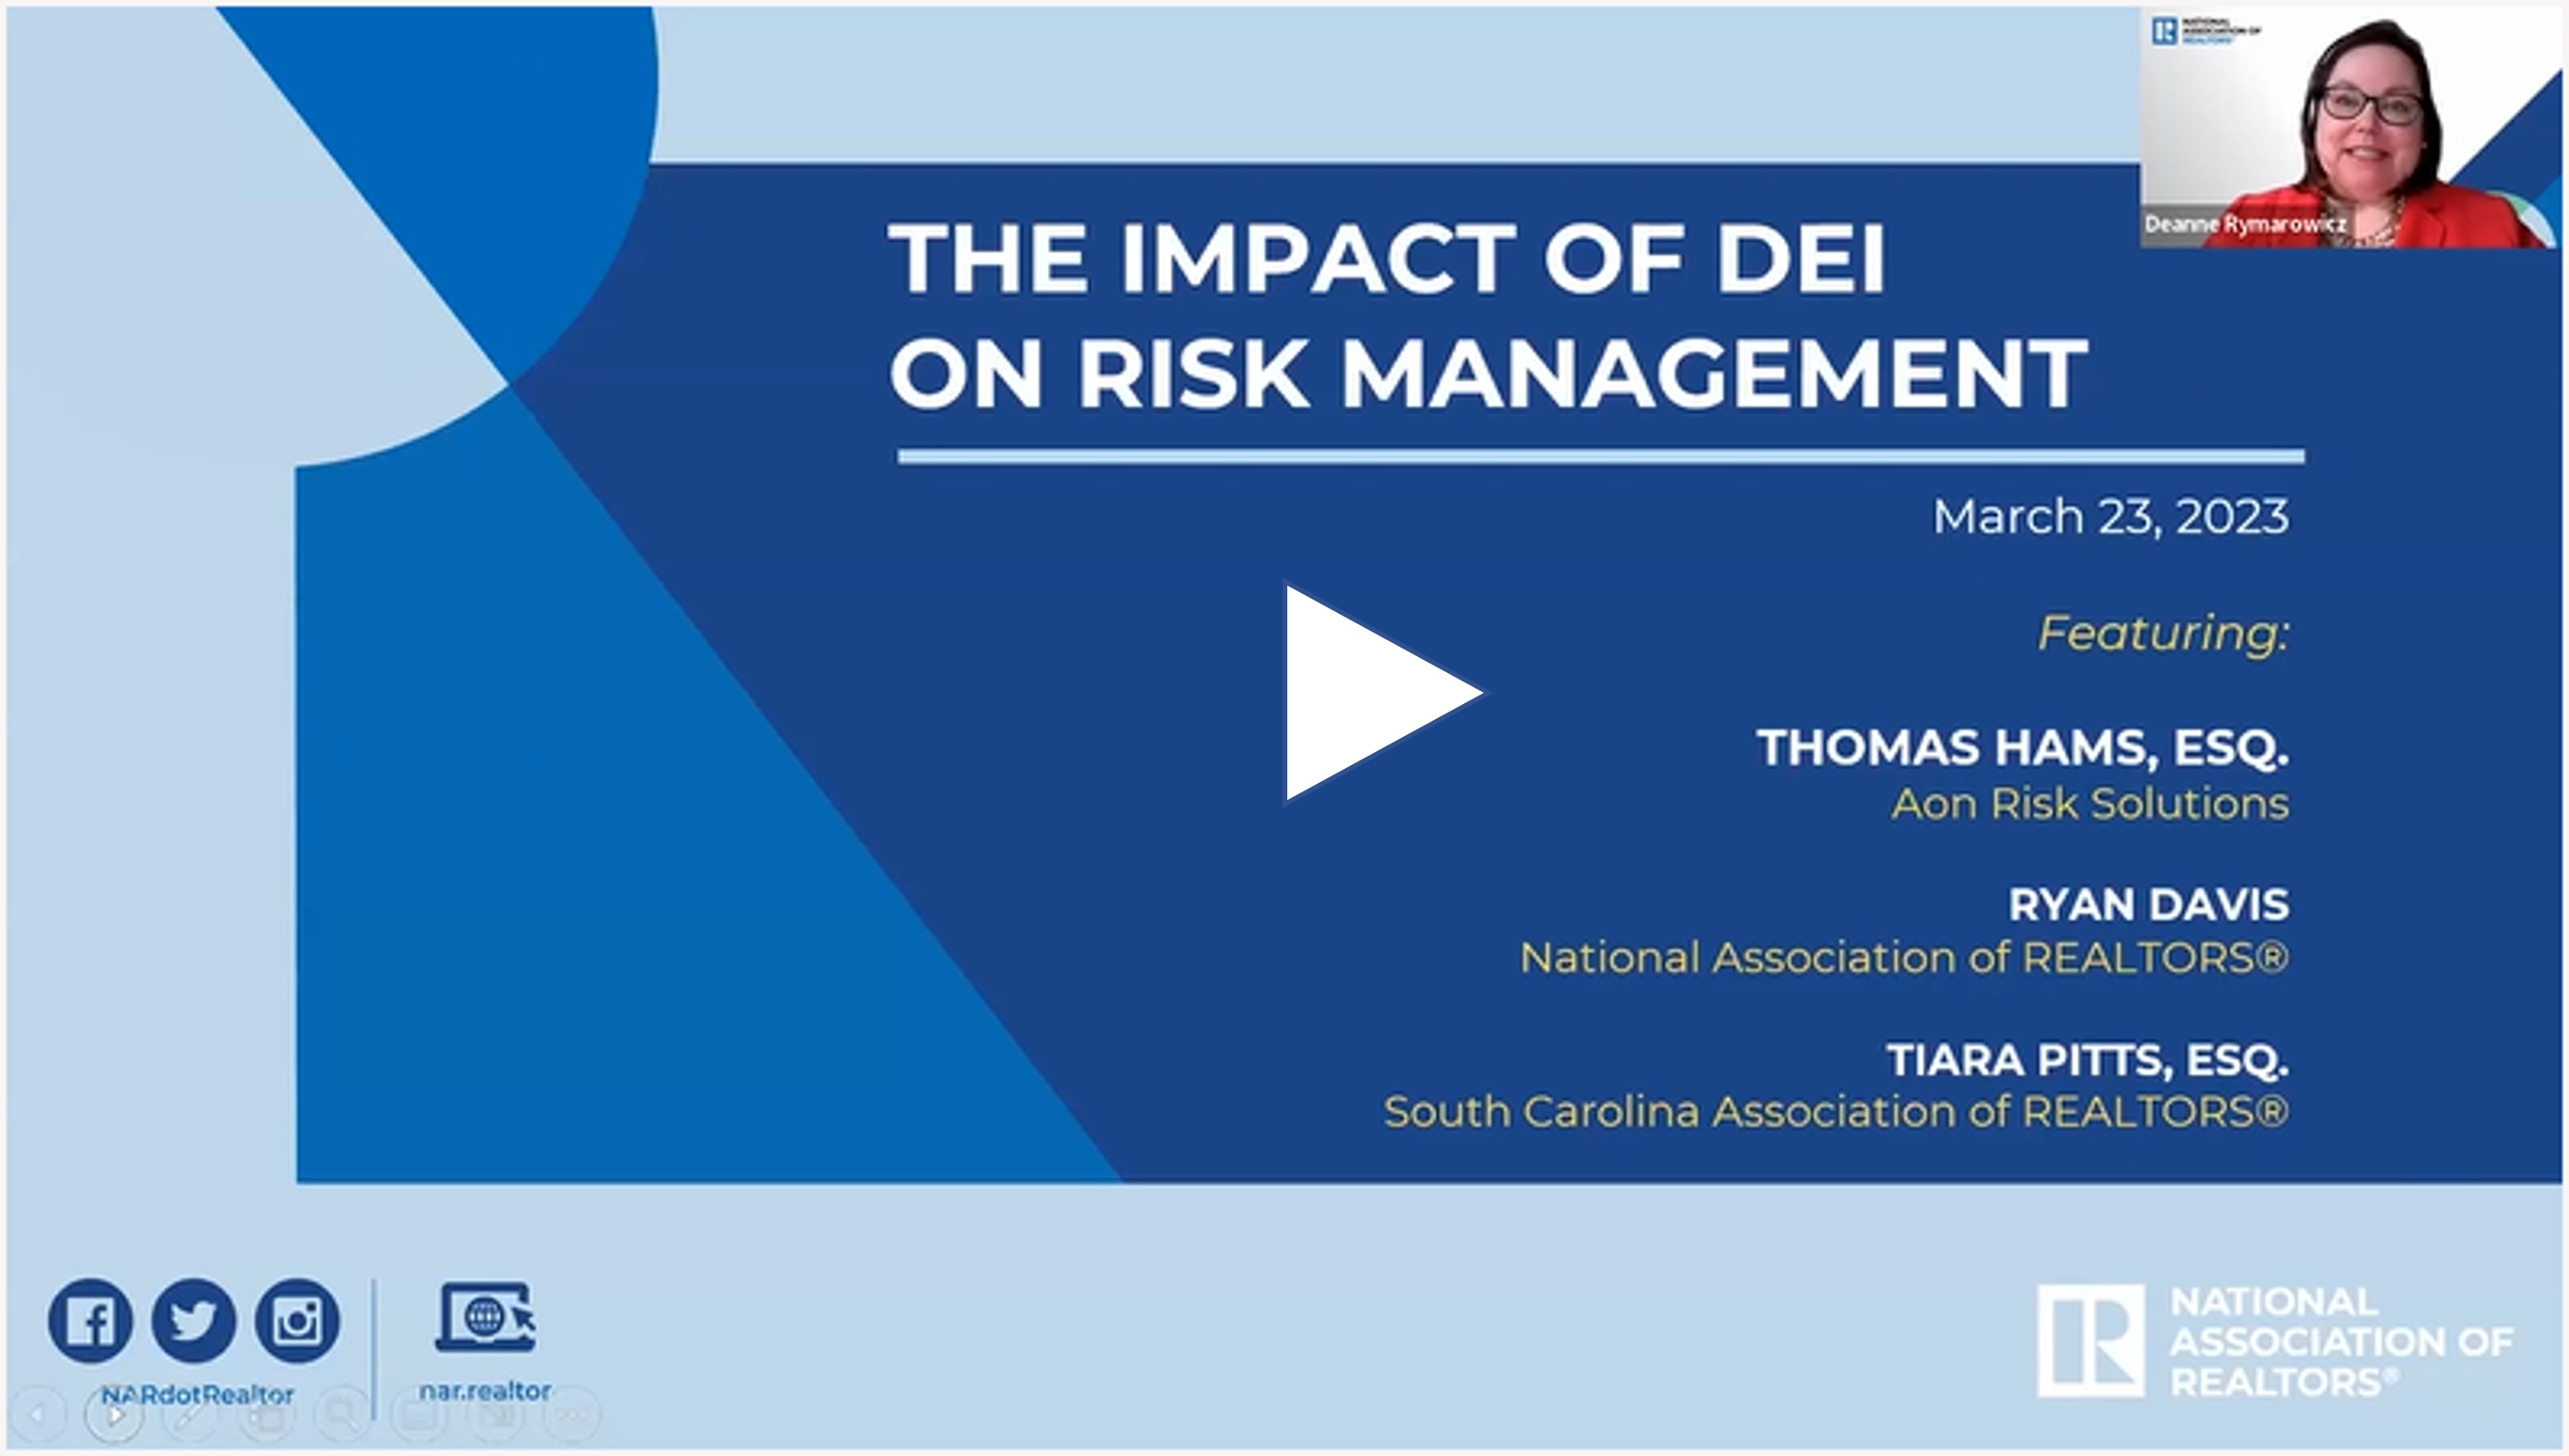 image of slide from The Impact of DEI on Risk Management